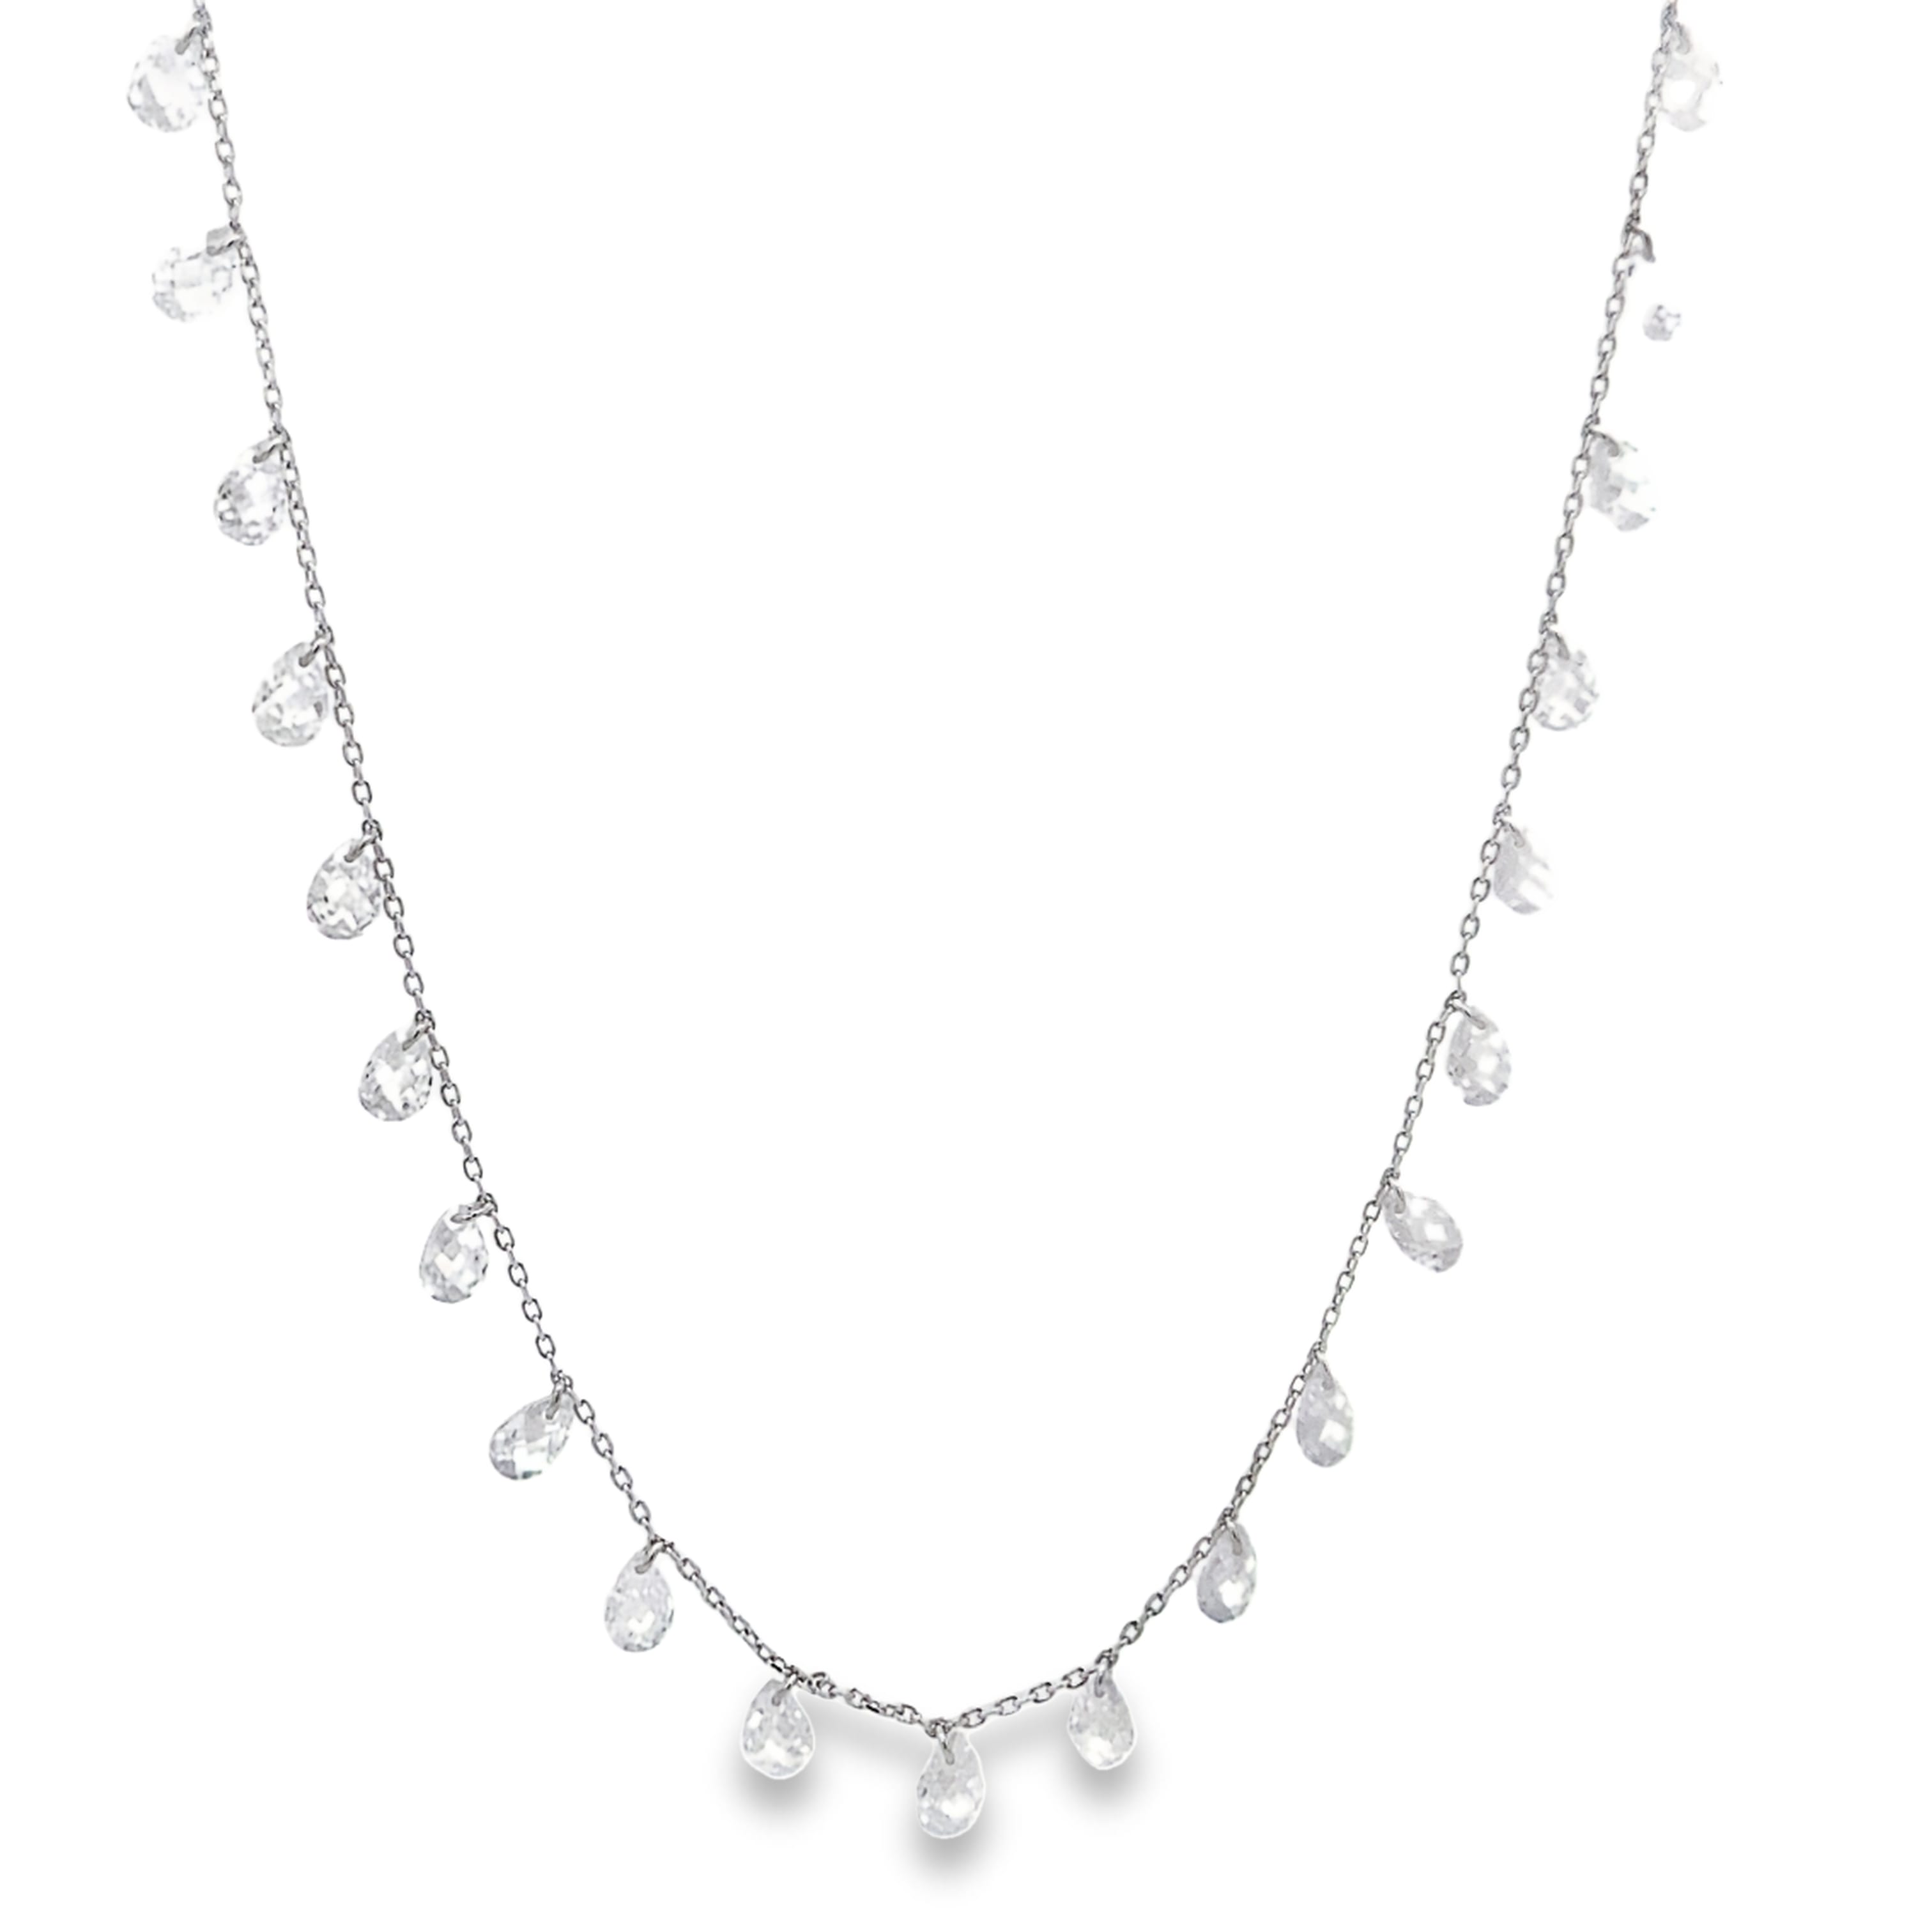 Droplet Silver Necklace